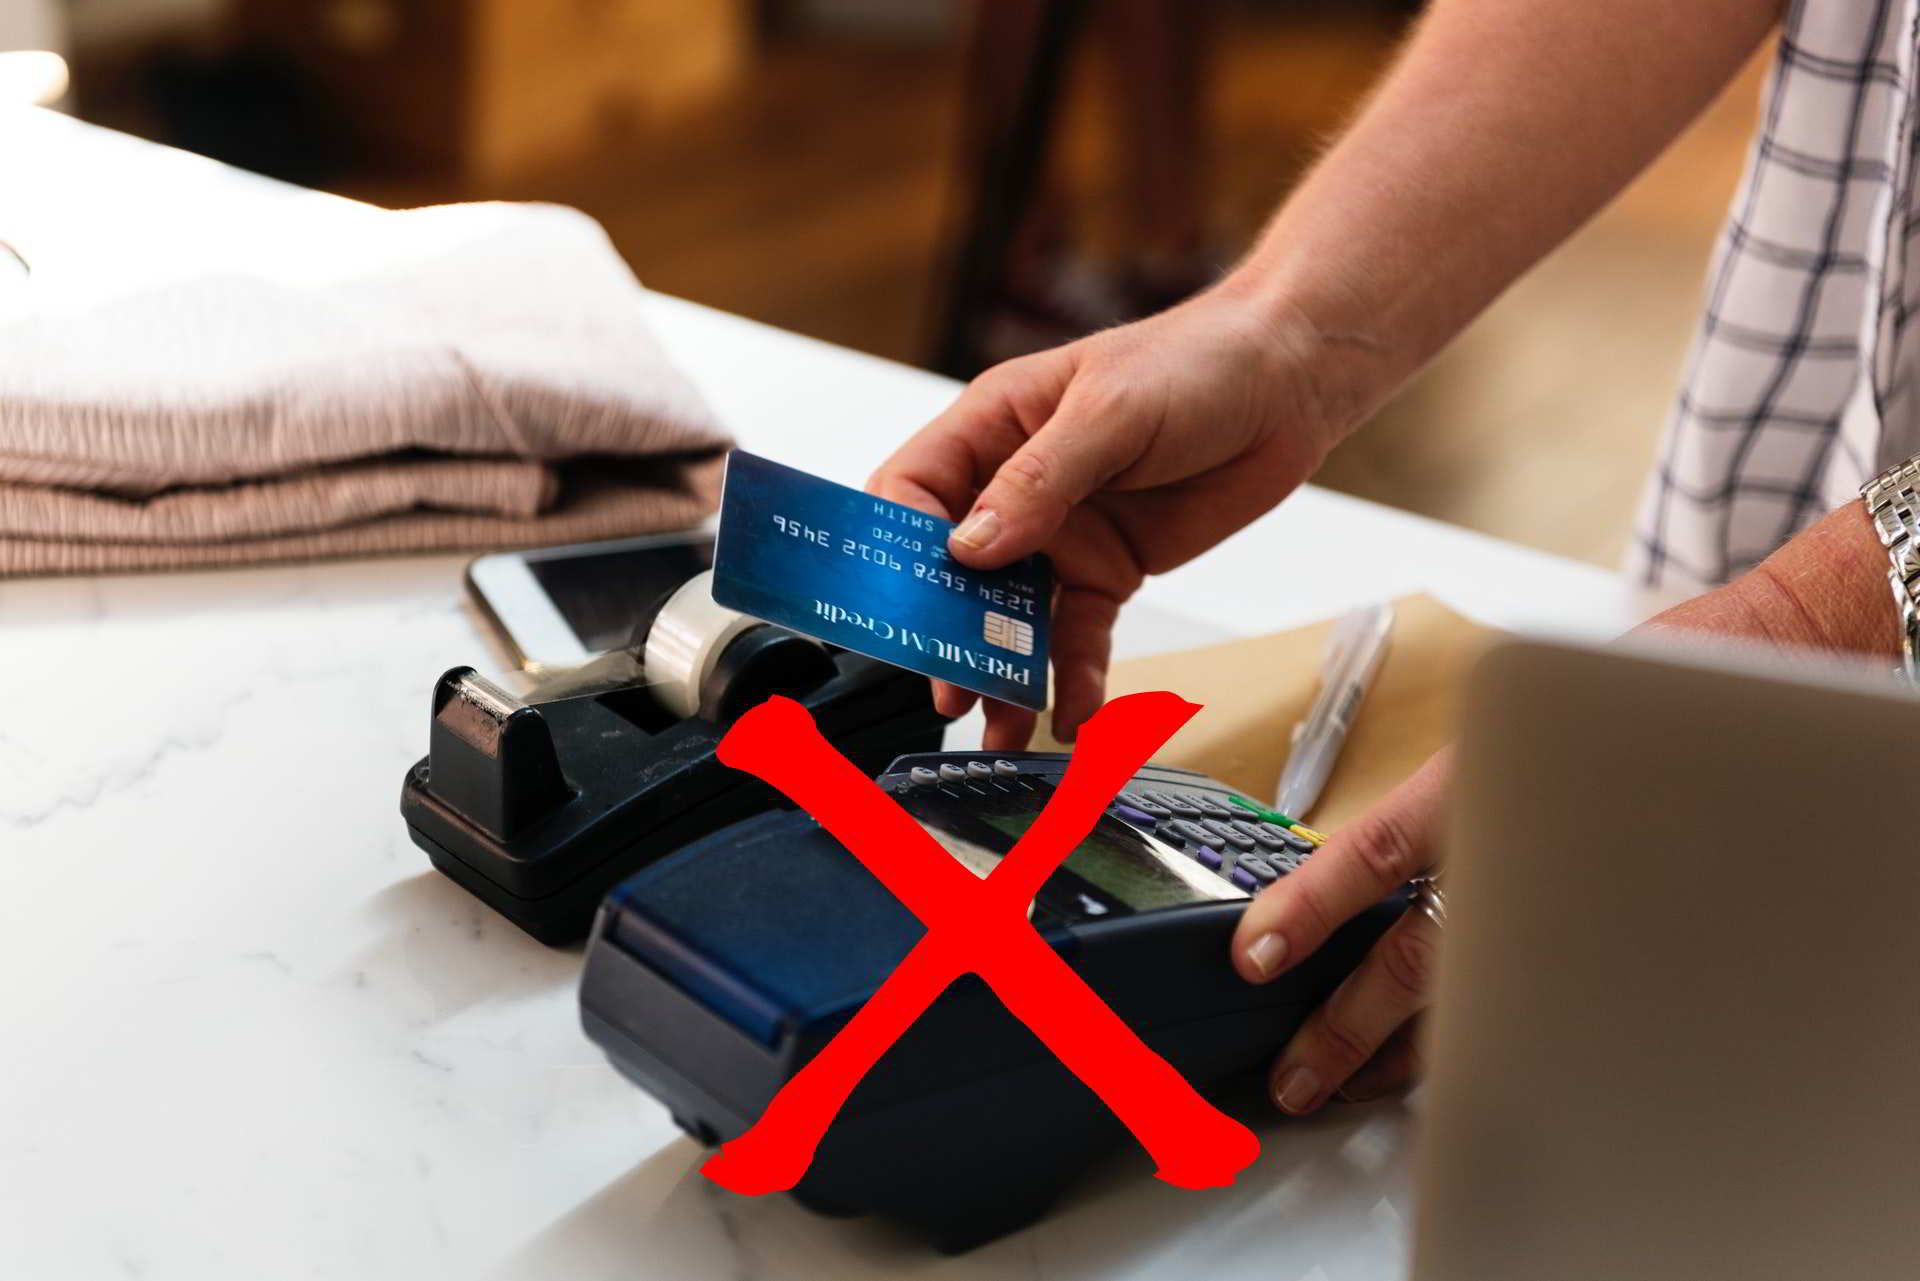 credit card payment on POS terminal scratched in red